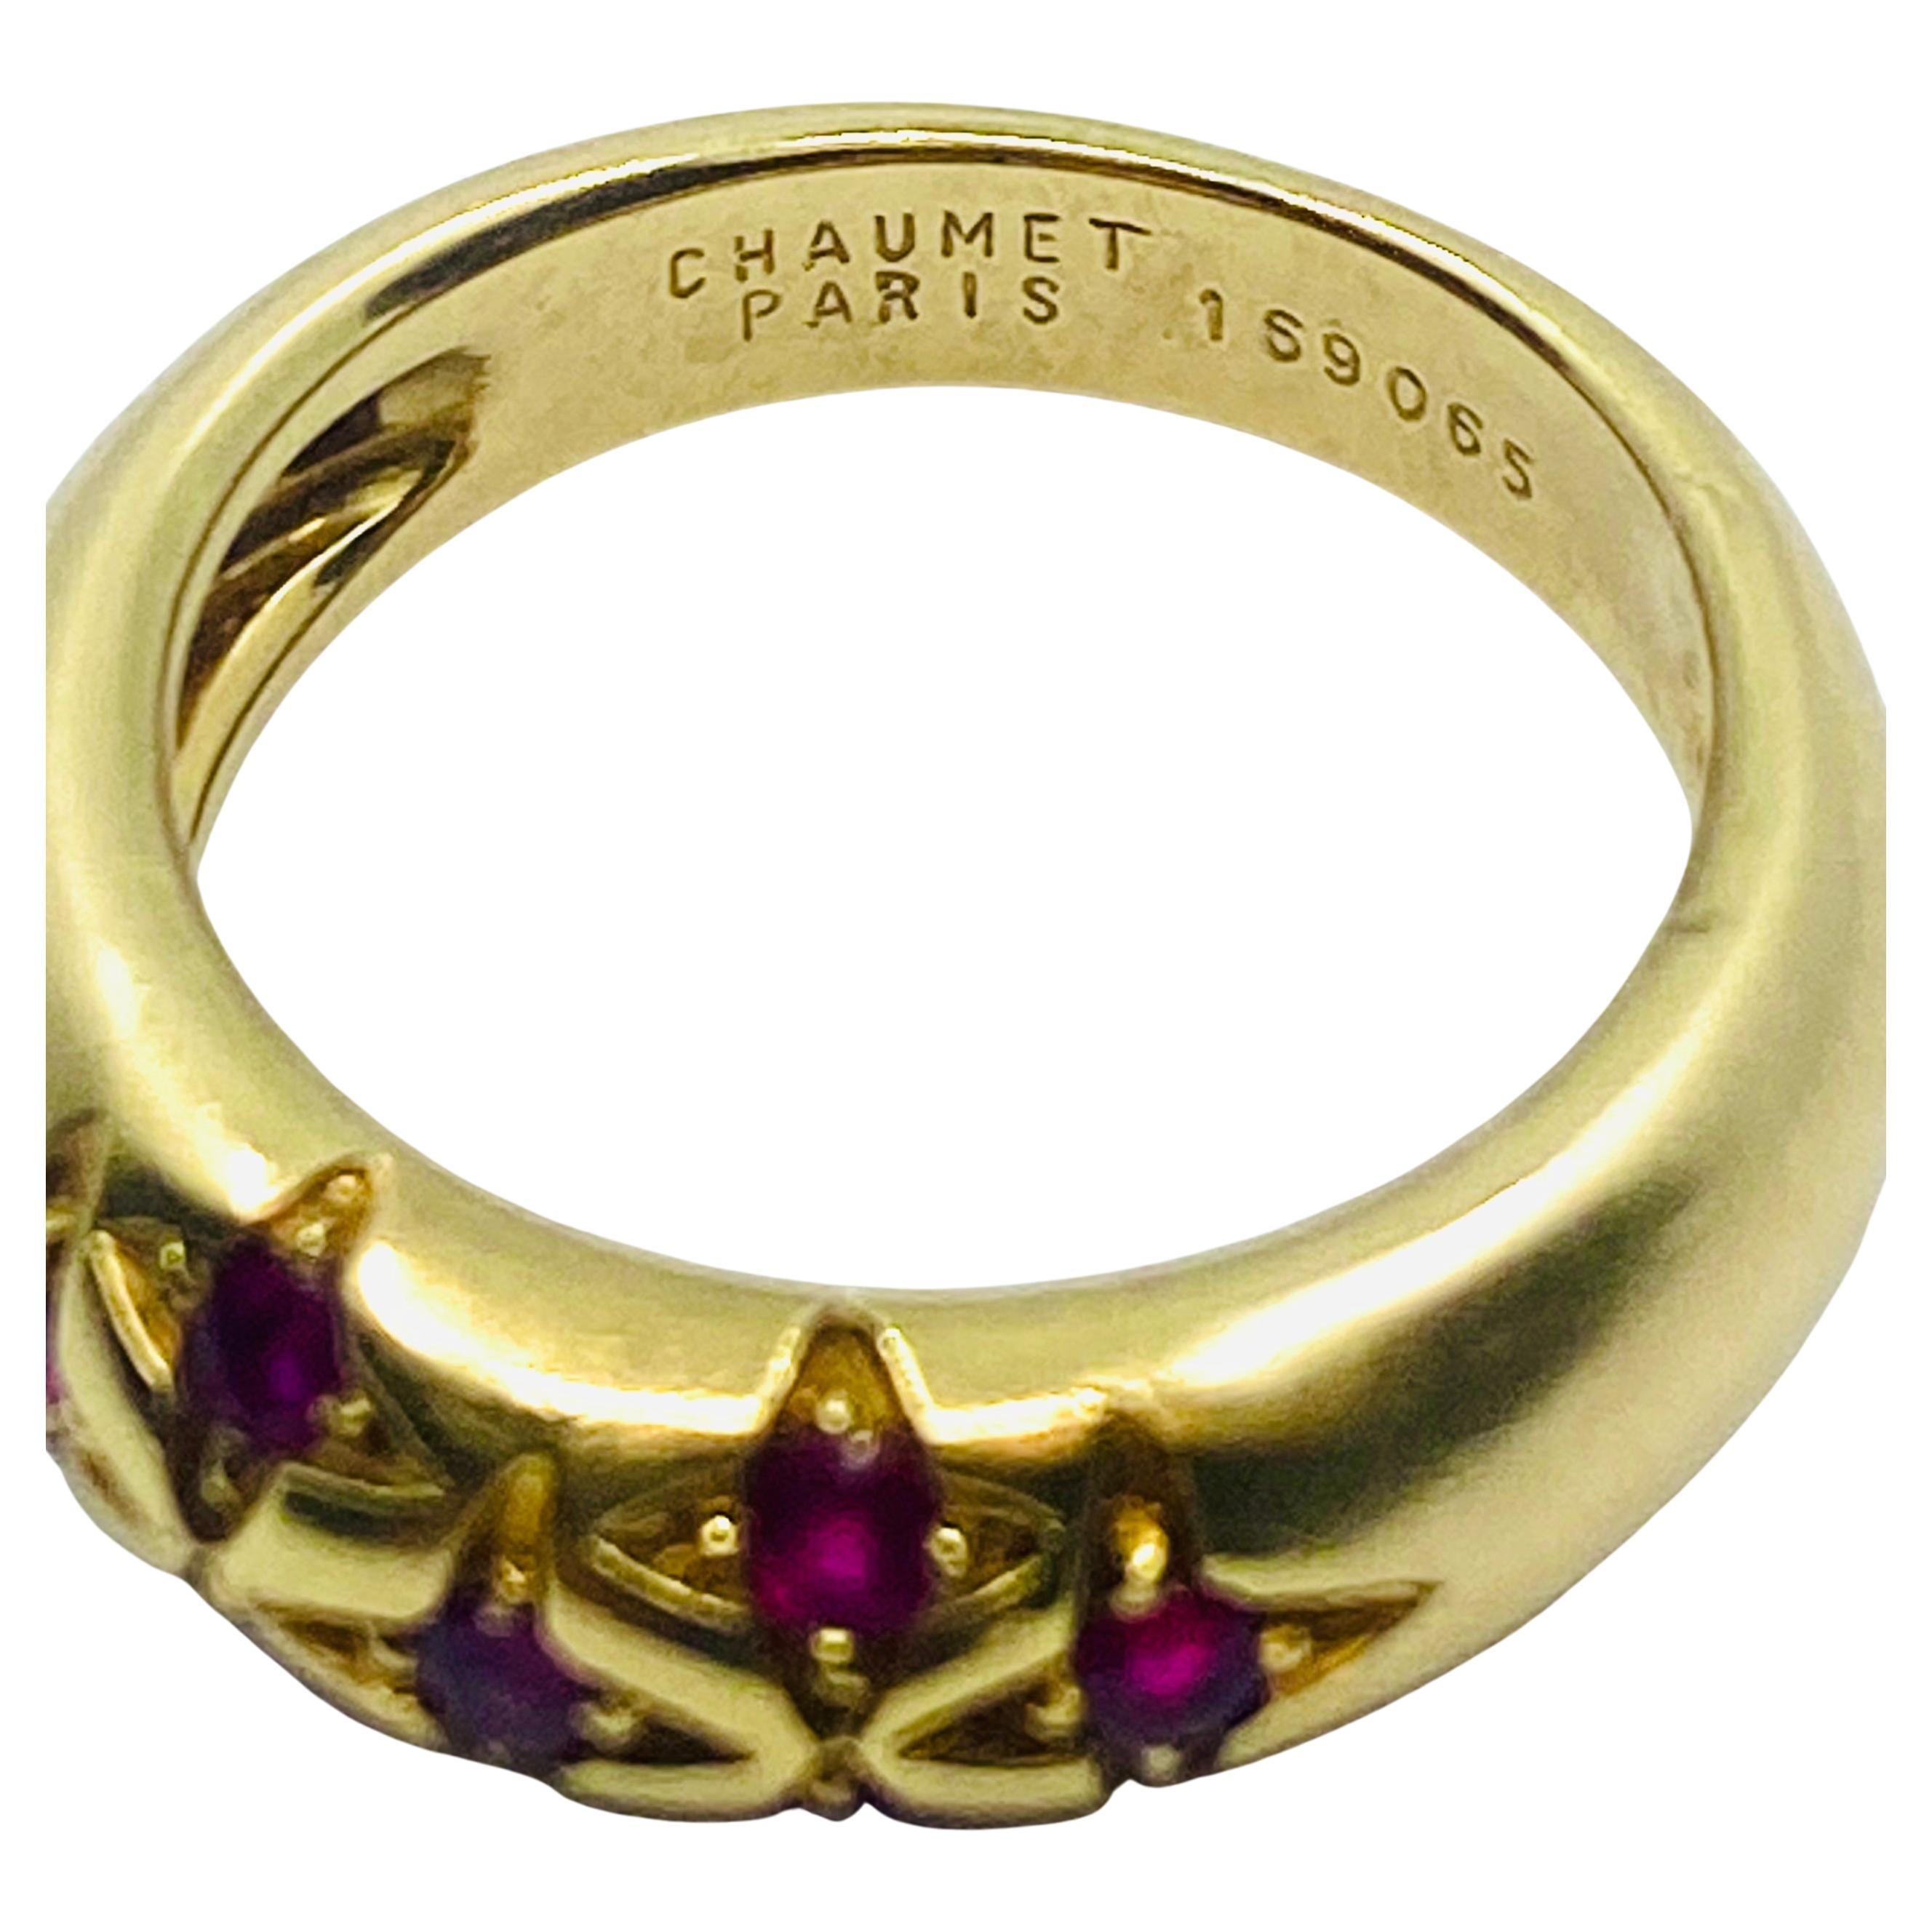 A Chaumet vintage ring made of 18k gold with starry design. The ring is crafted as a domed band with seven stars chiseled in the middle. In the center of each star there are four-prong set cabochon rubies. The gems enhance the look with their vivid